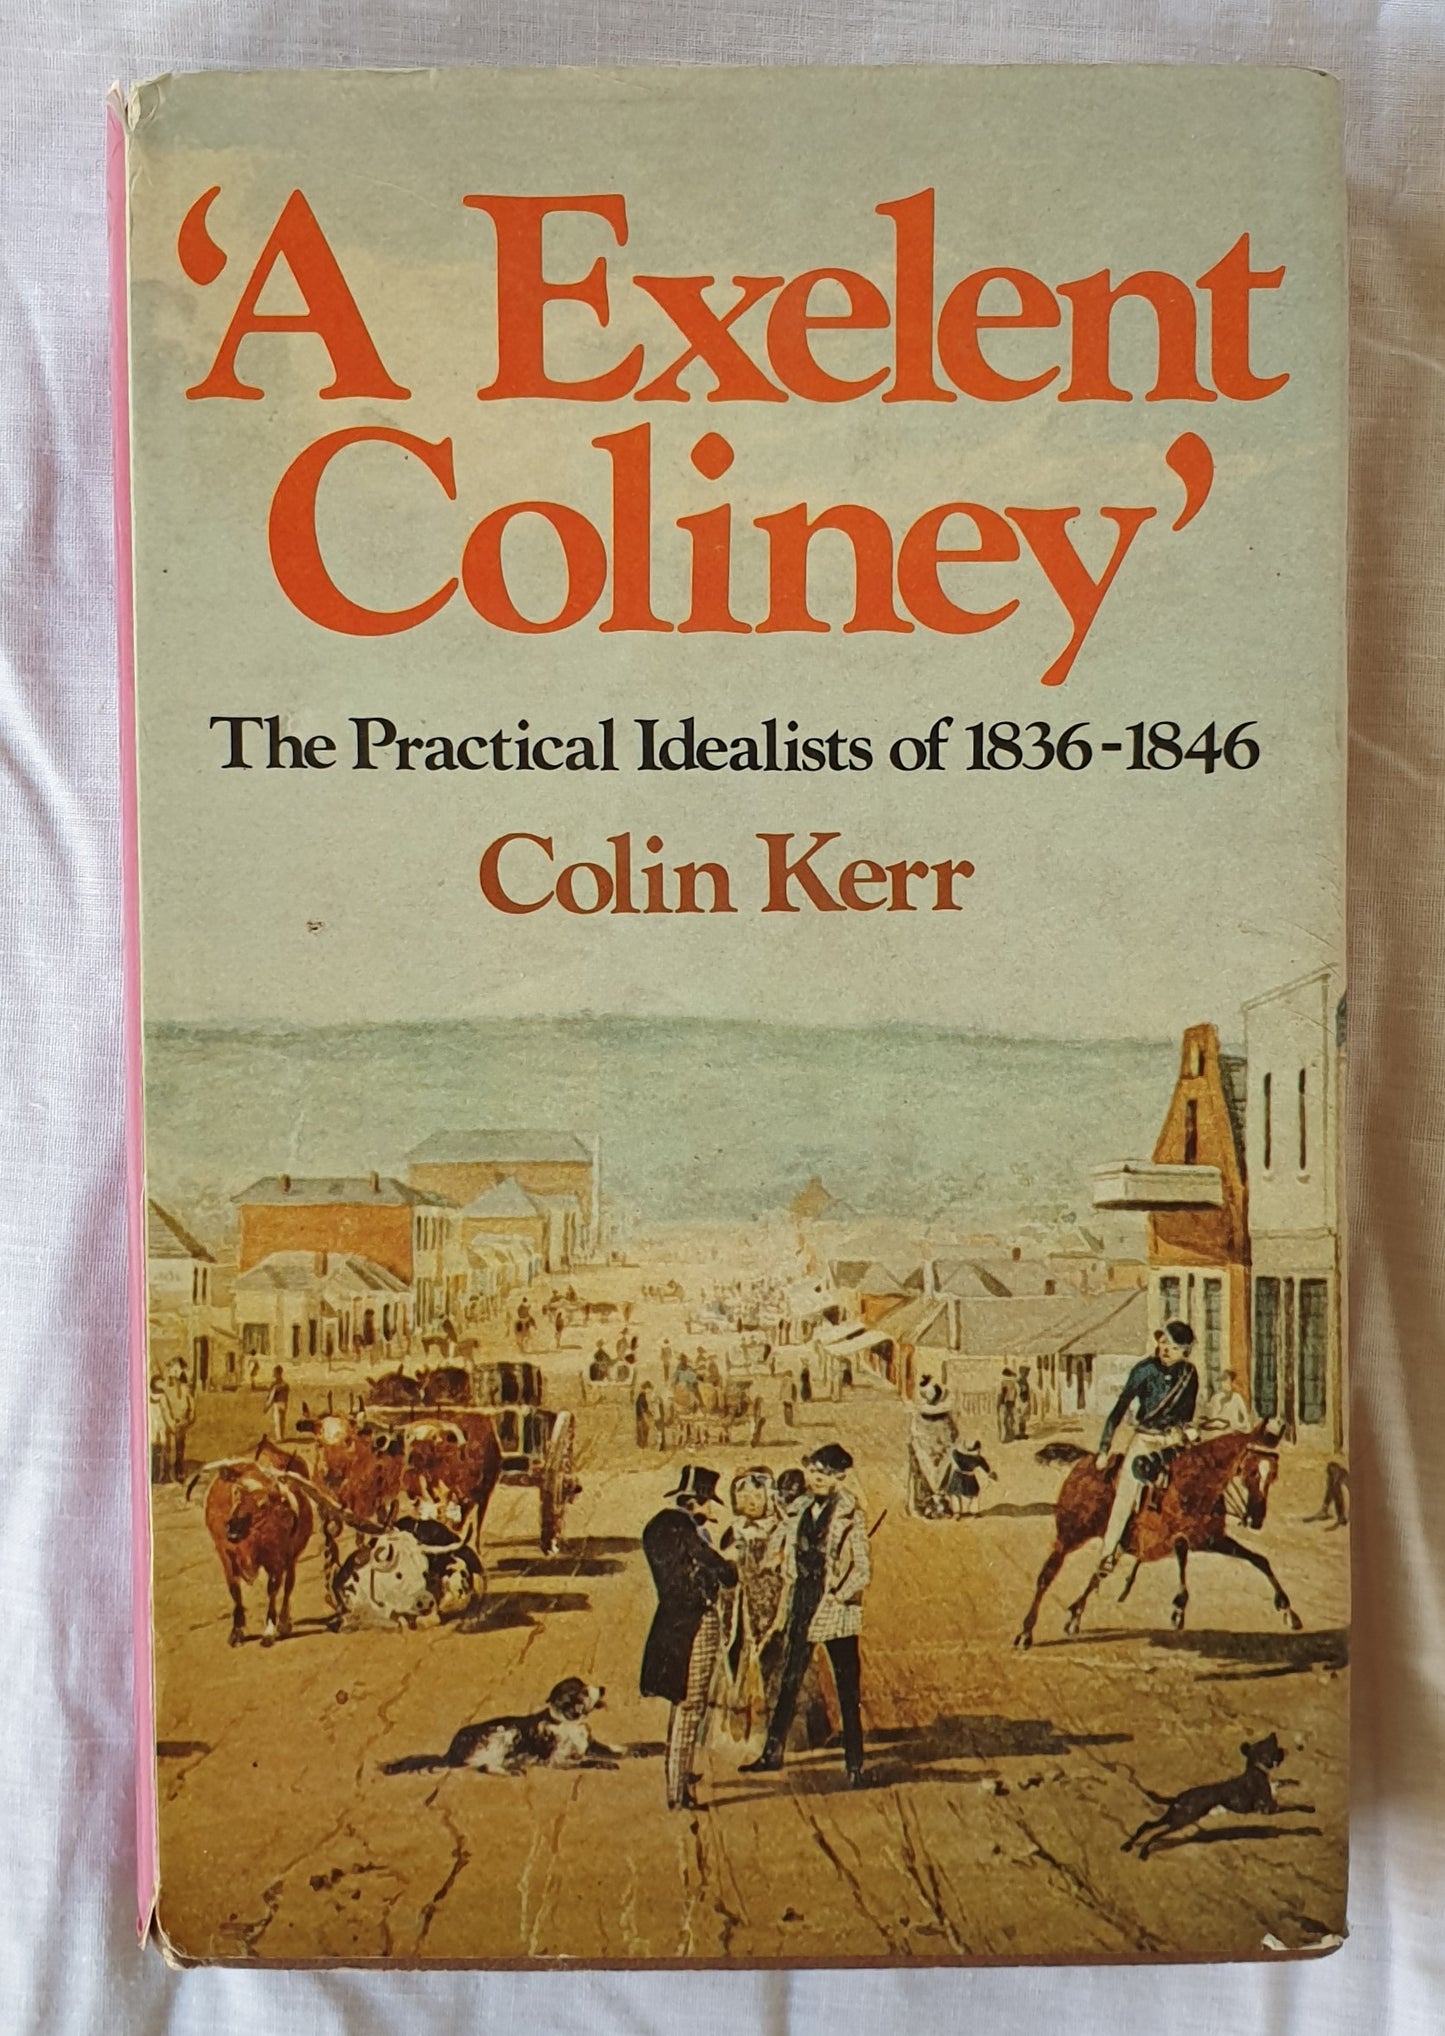 ‘A Excellent Coliney’ by Colin Kerr